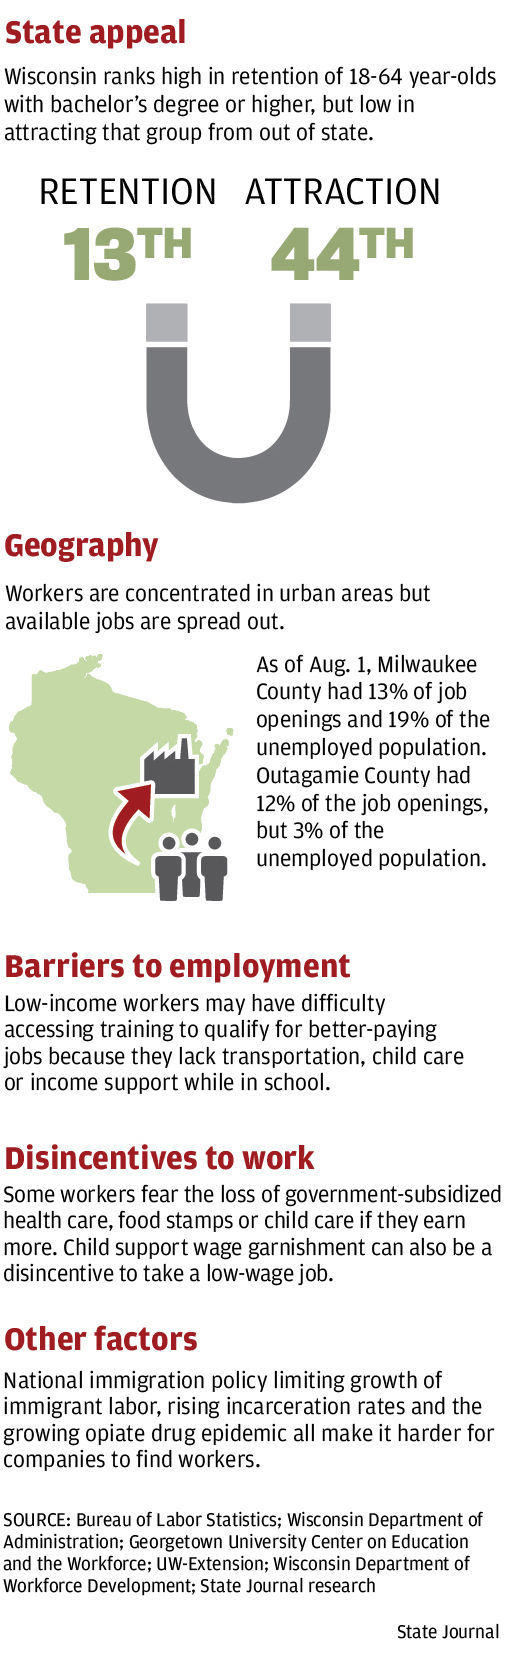 wisconsin businesses grapple with a growing worker shortage